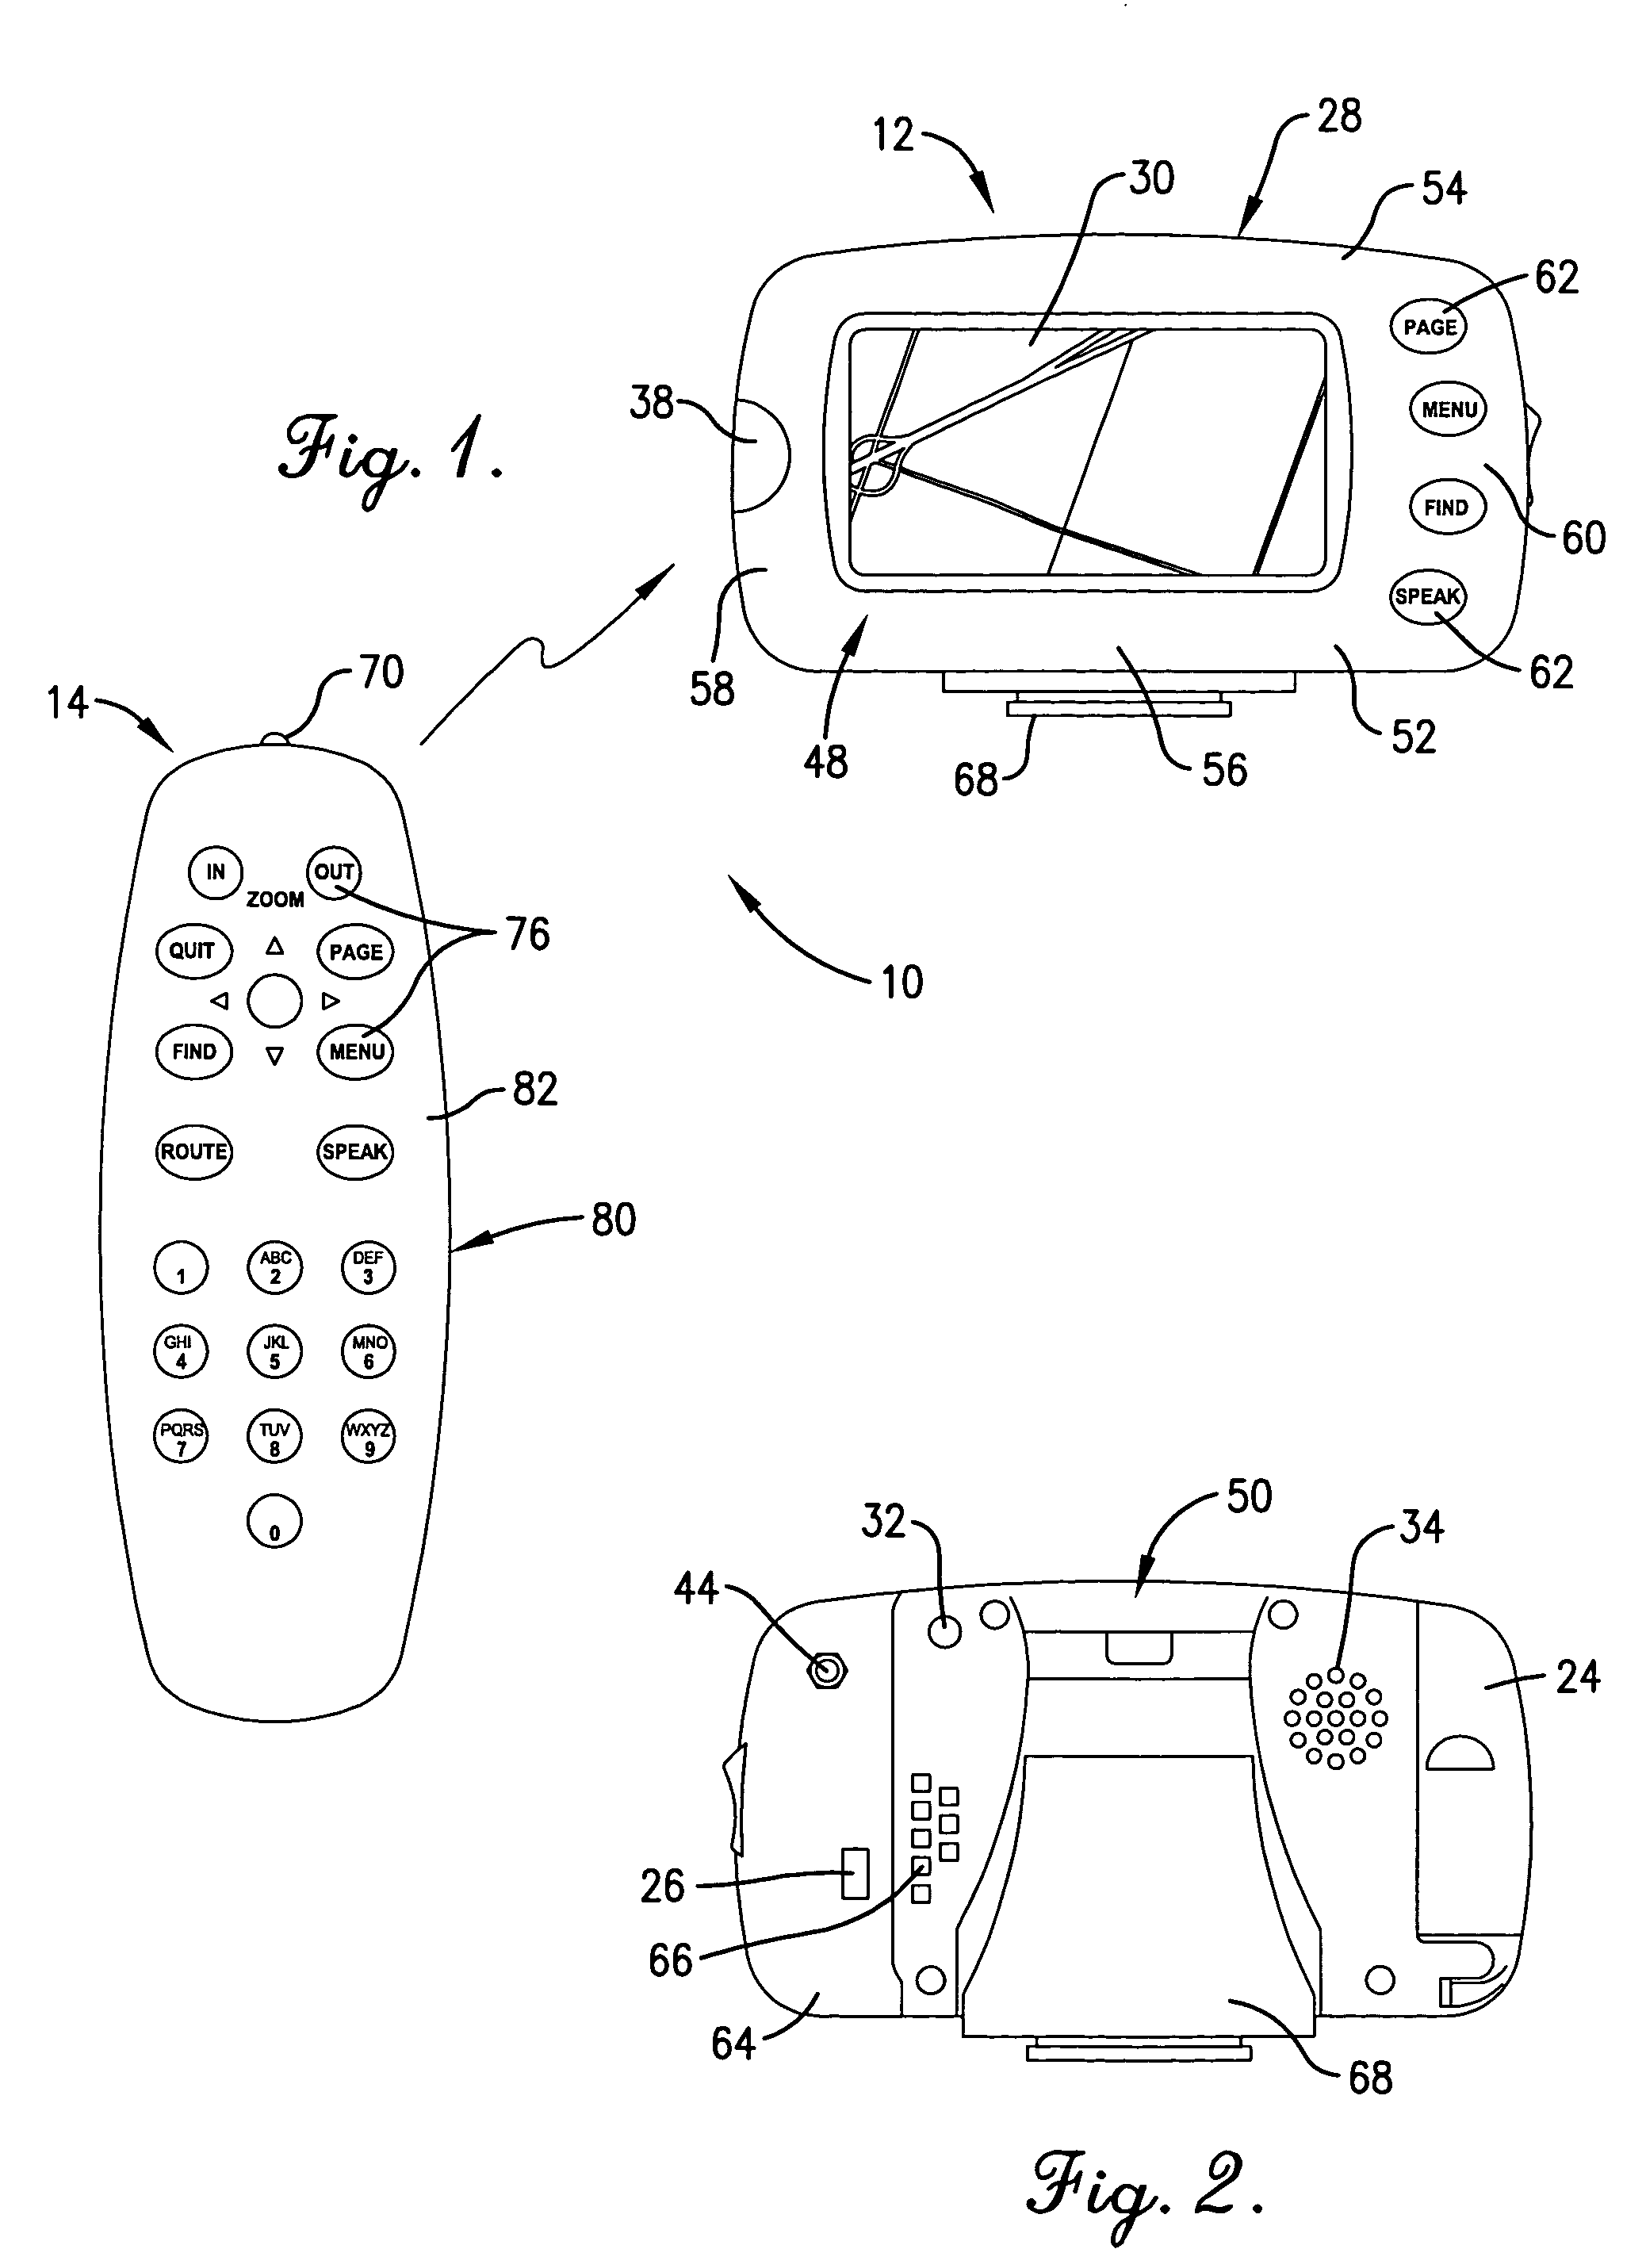 Portable navigational device with a remote control, an internal memory, and an internal heating element